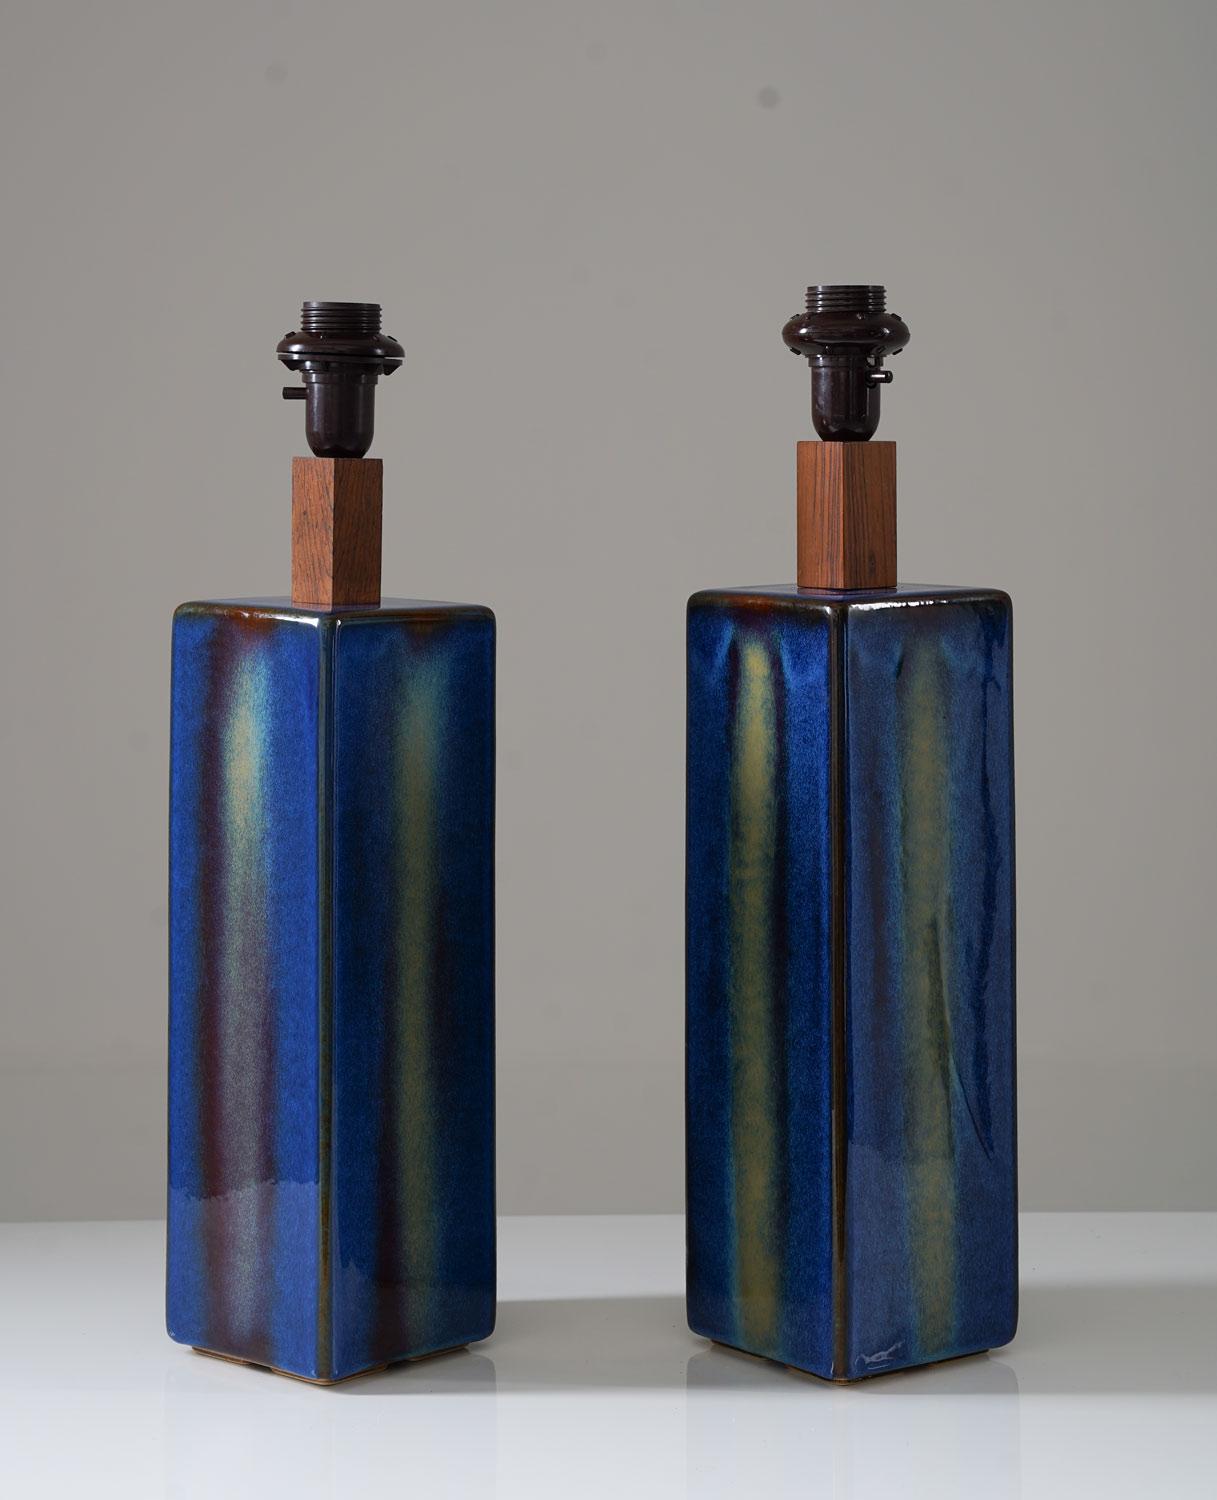 Introducing a stunning pair of large ceramic table lamps with wooden details, crafted by Søholm Stentøj of Bornholm, Denmark. These lamps are in very good original condition, and they would make a beautiful addition to any home.

Søholm Stentøj was